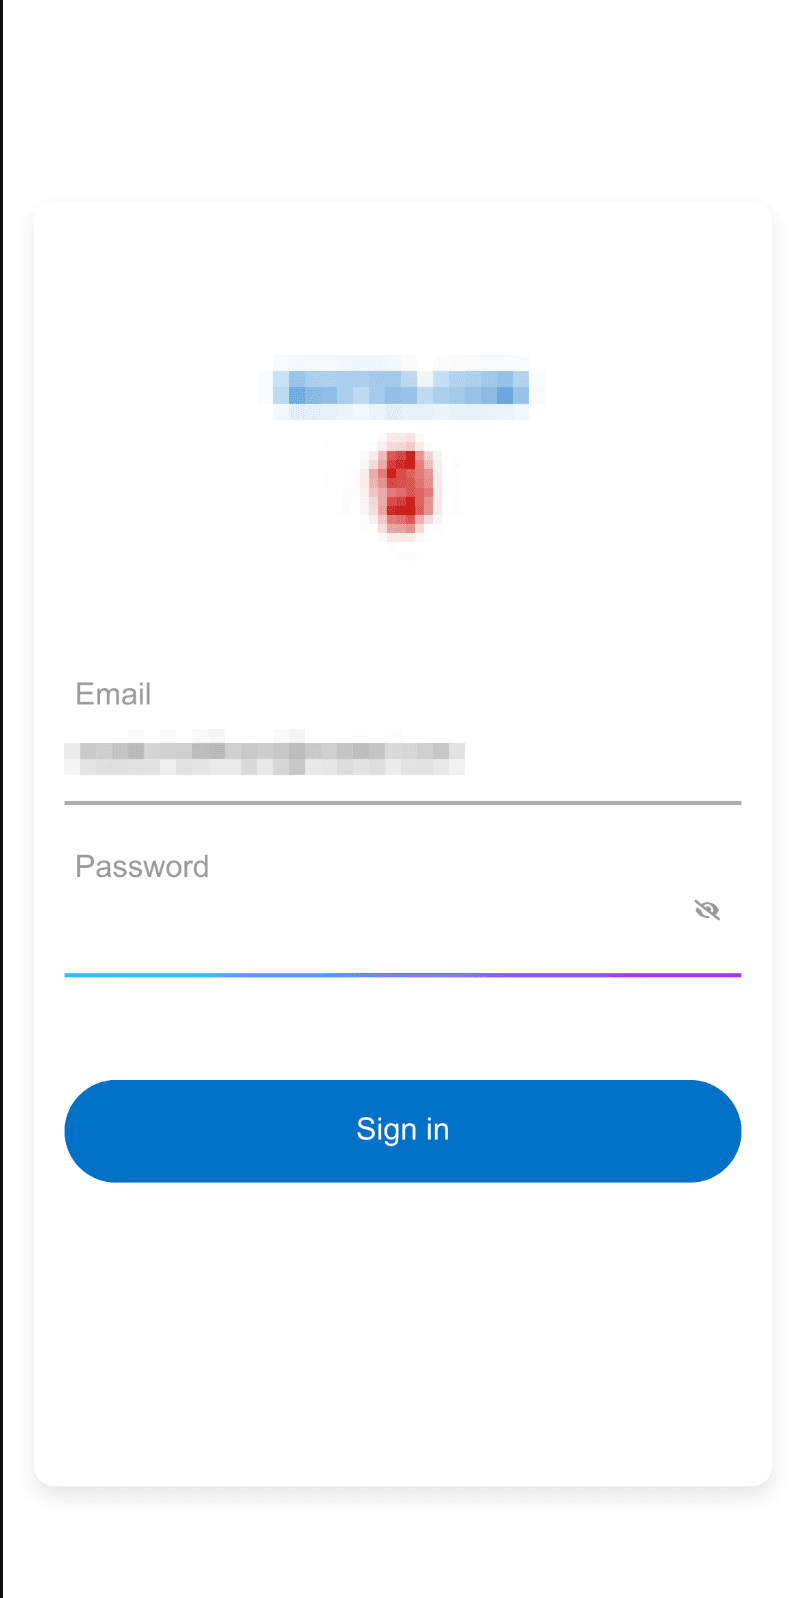 Encryption Credential Phishing Page